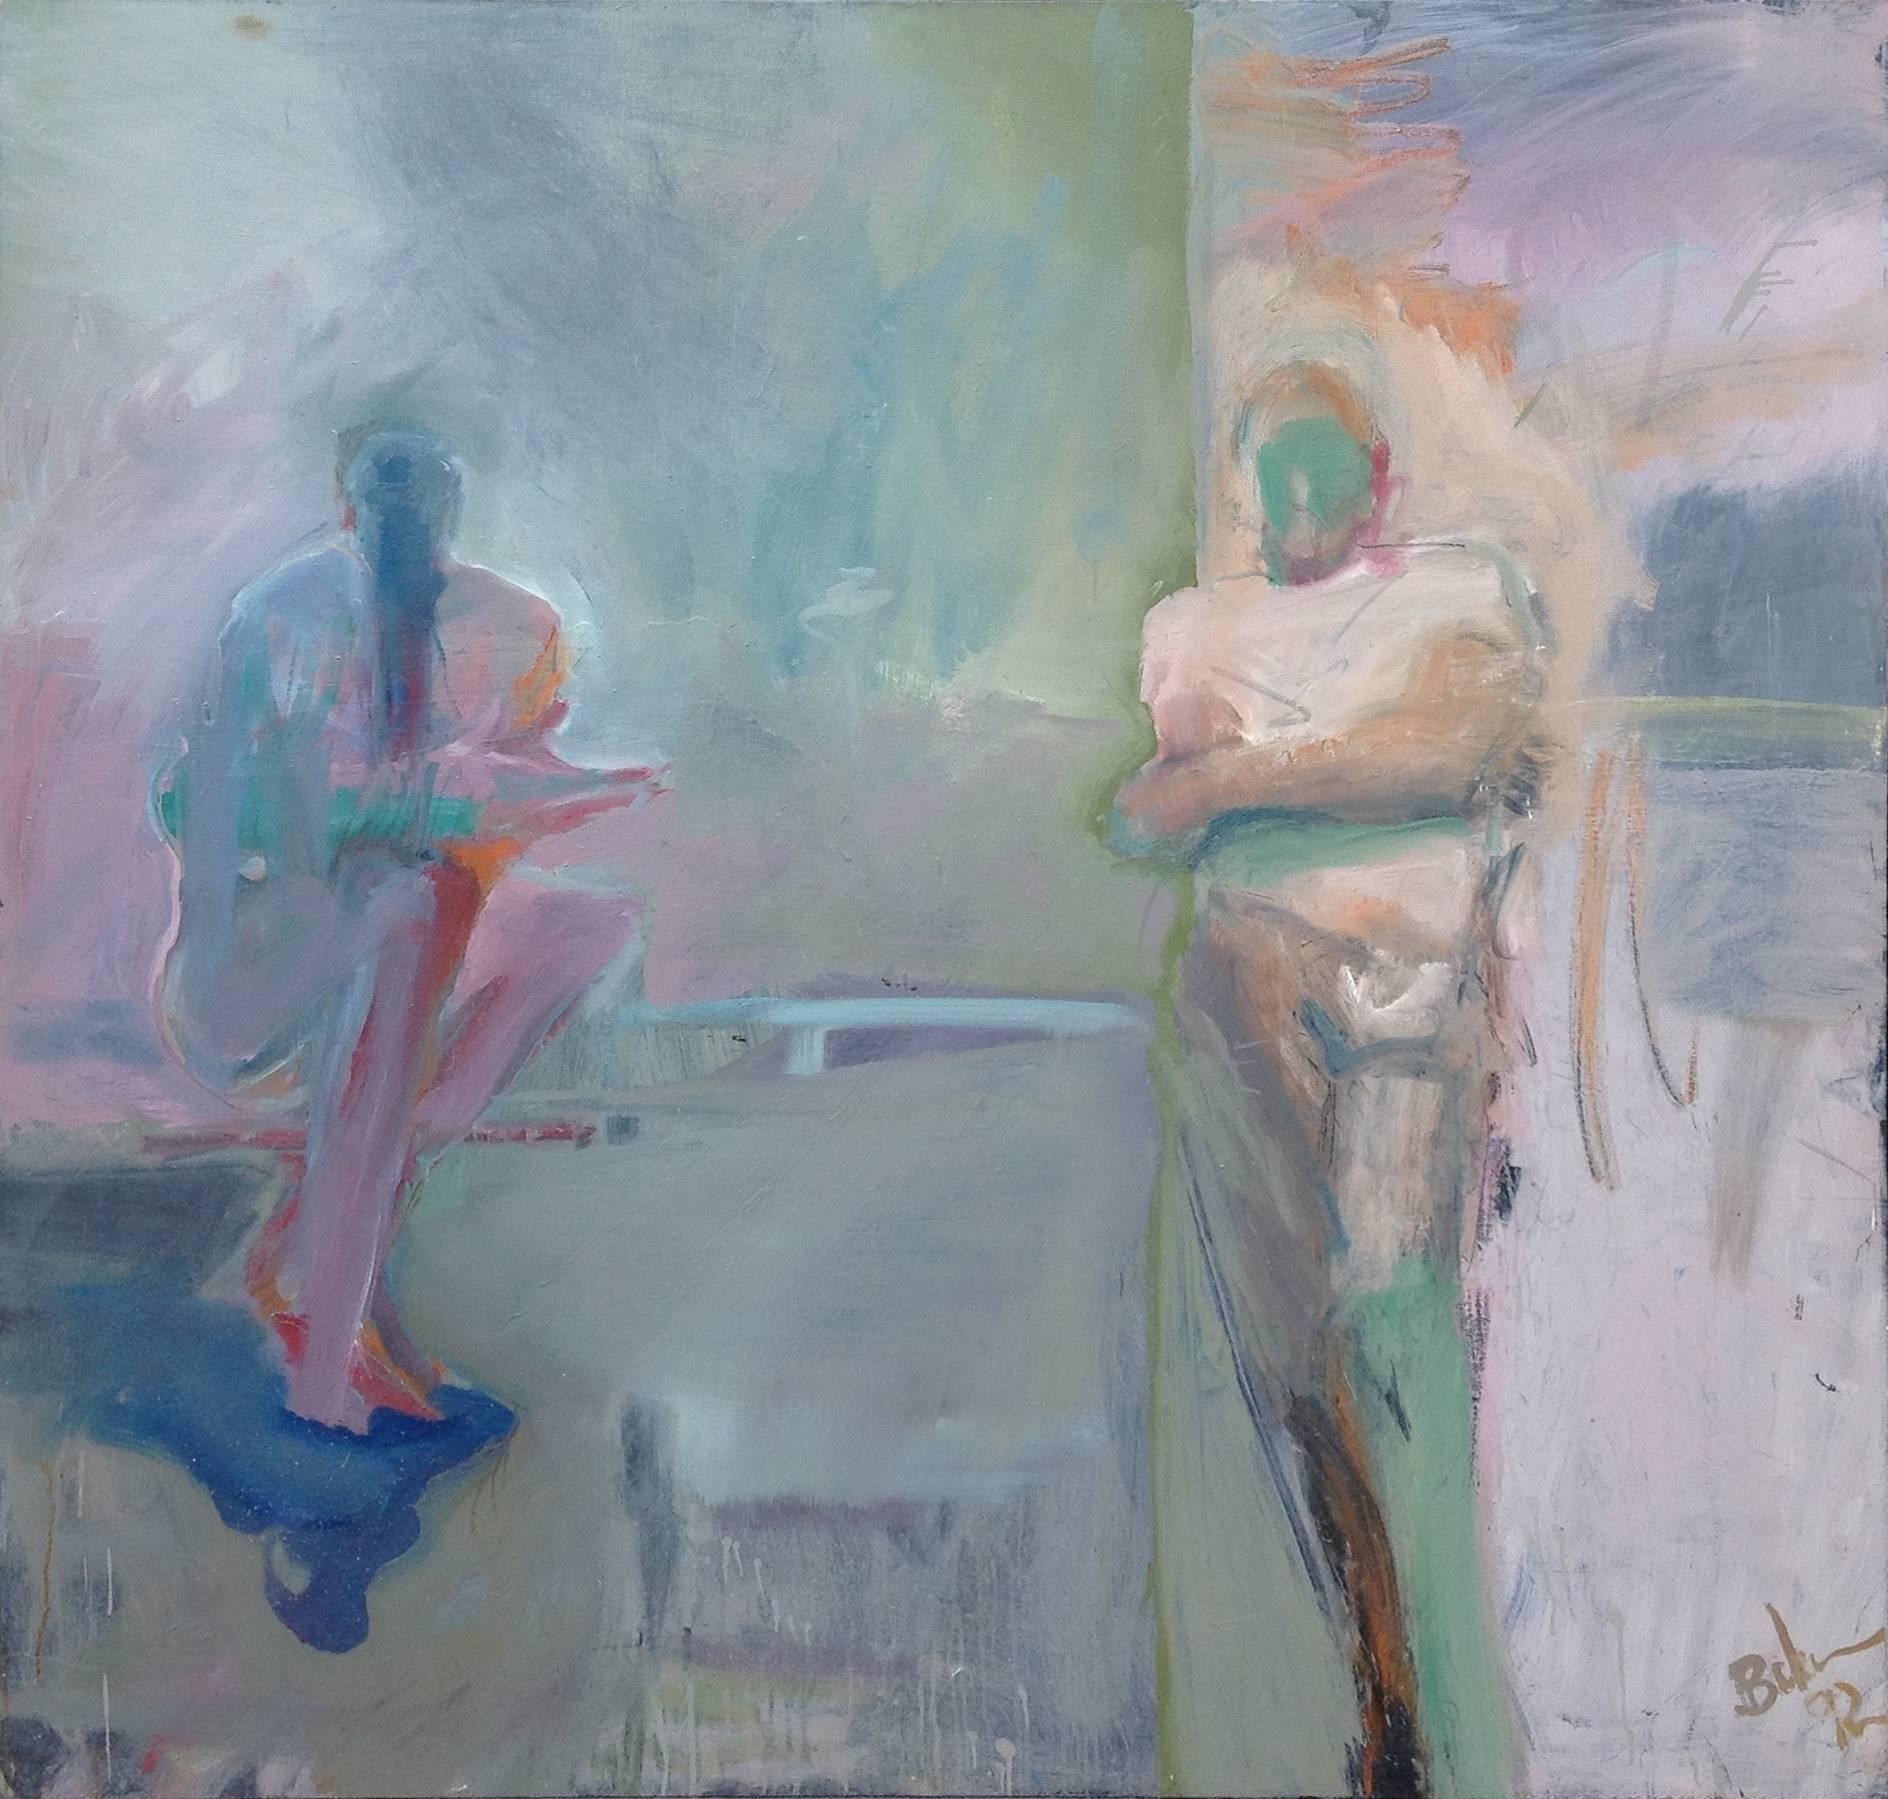 Joby Baker Figurative Painting - Now and Then: For Mandelker